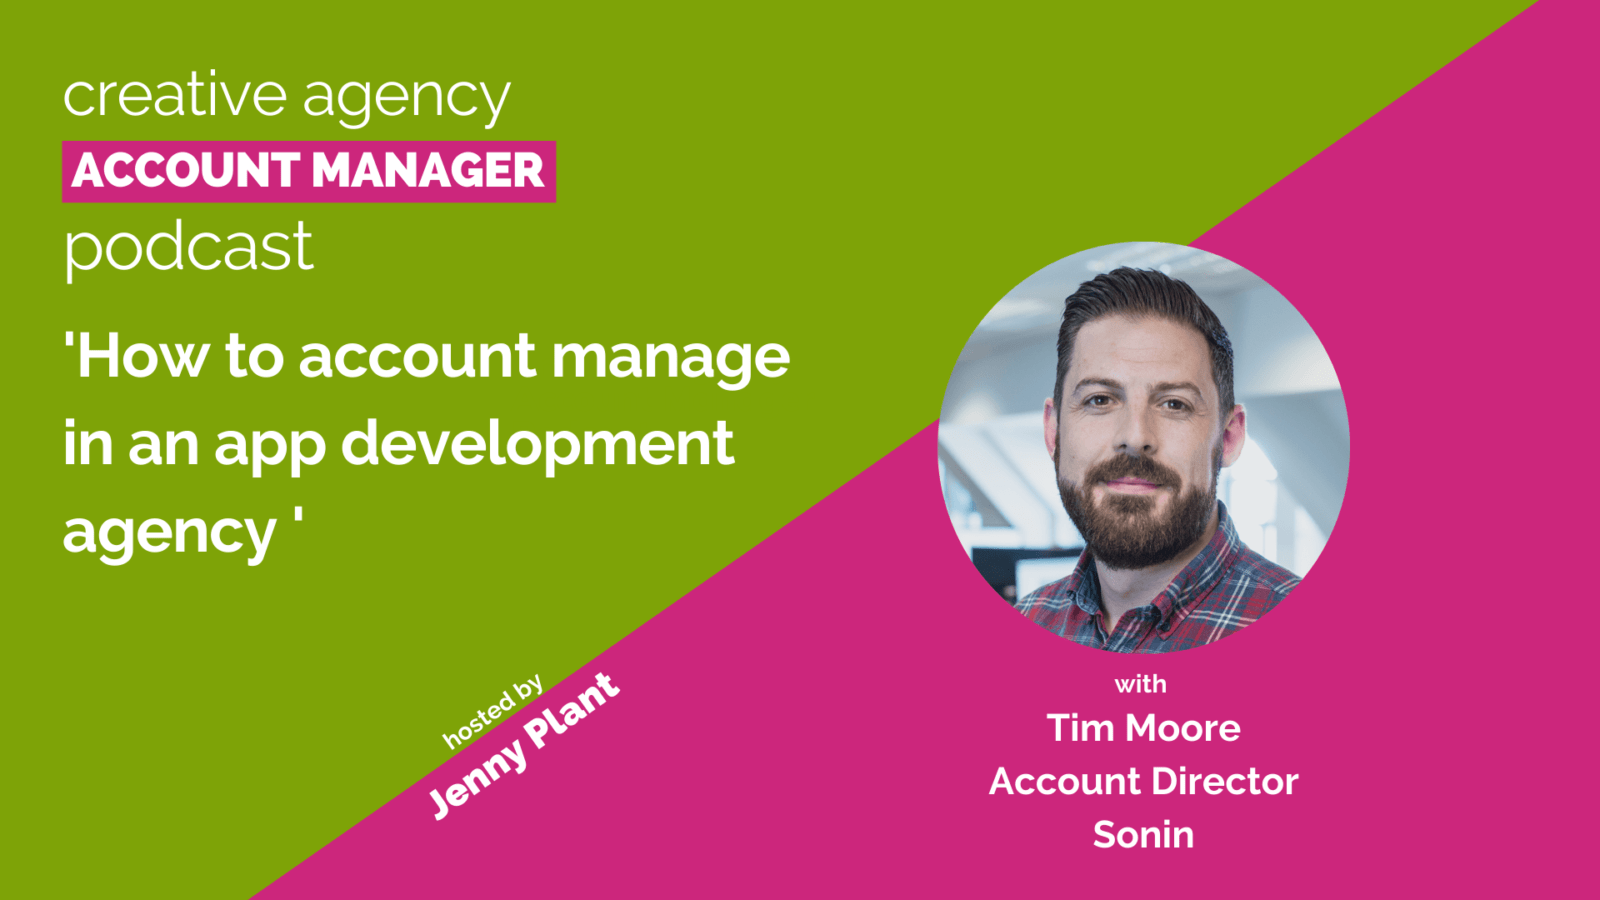 How to account manage in an app development agency with Tim Moore, Sonin